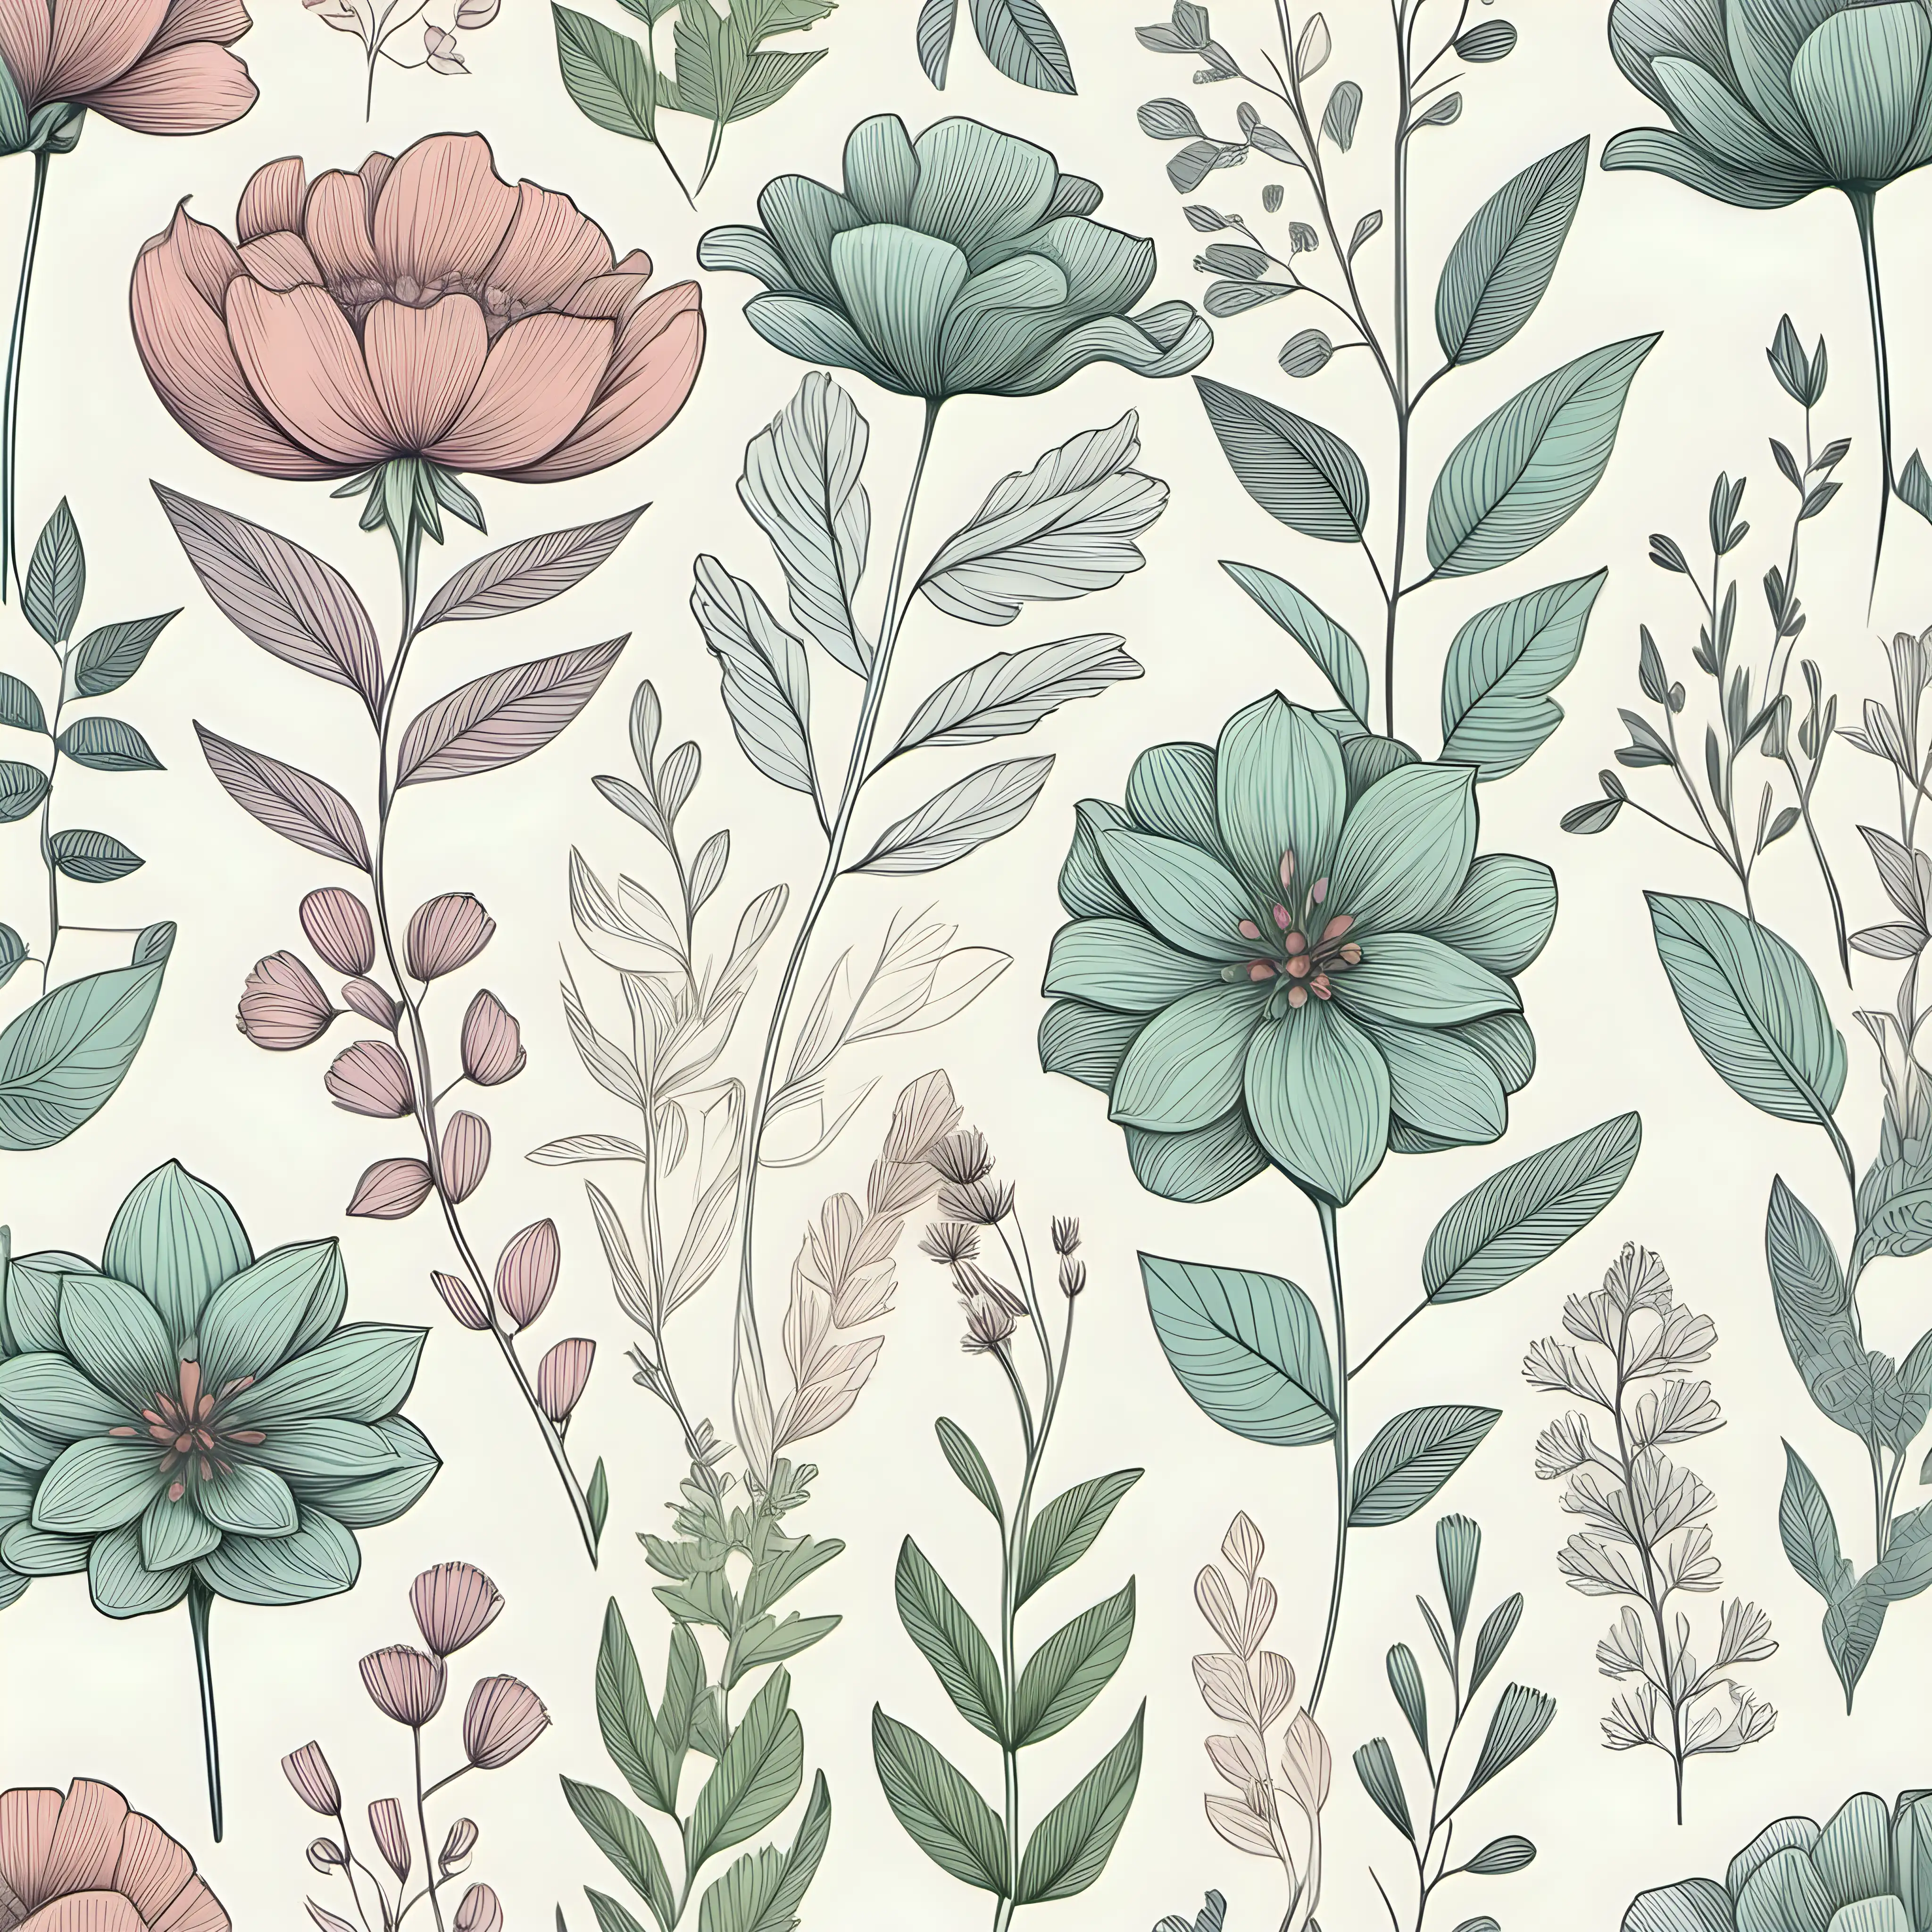 Tranquil Natureinspired Pastel Print Pattern with Blooming Flowers and Fresh Herbs